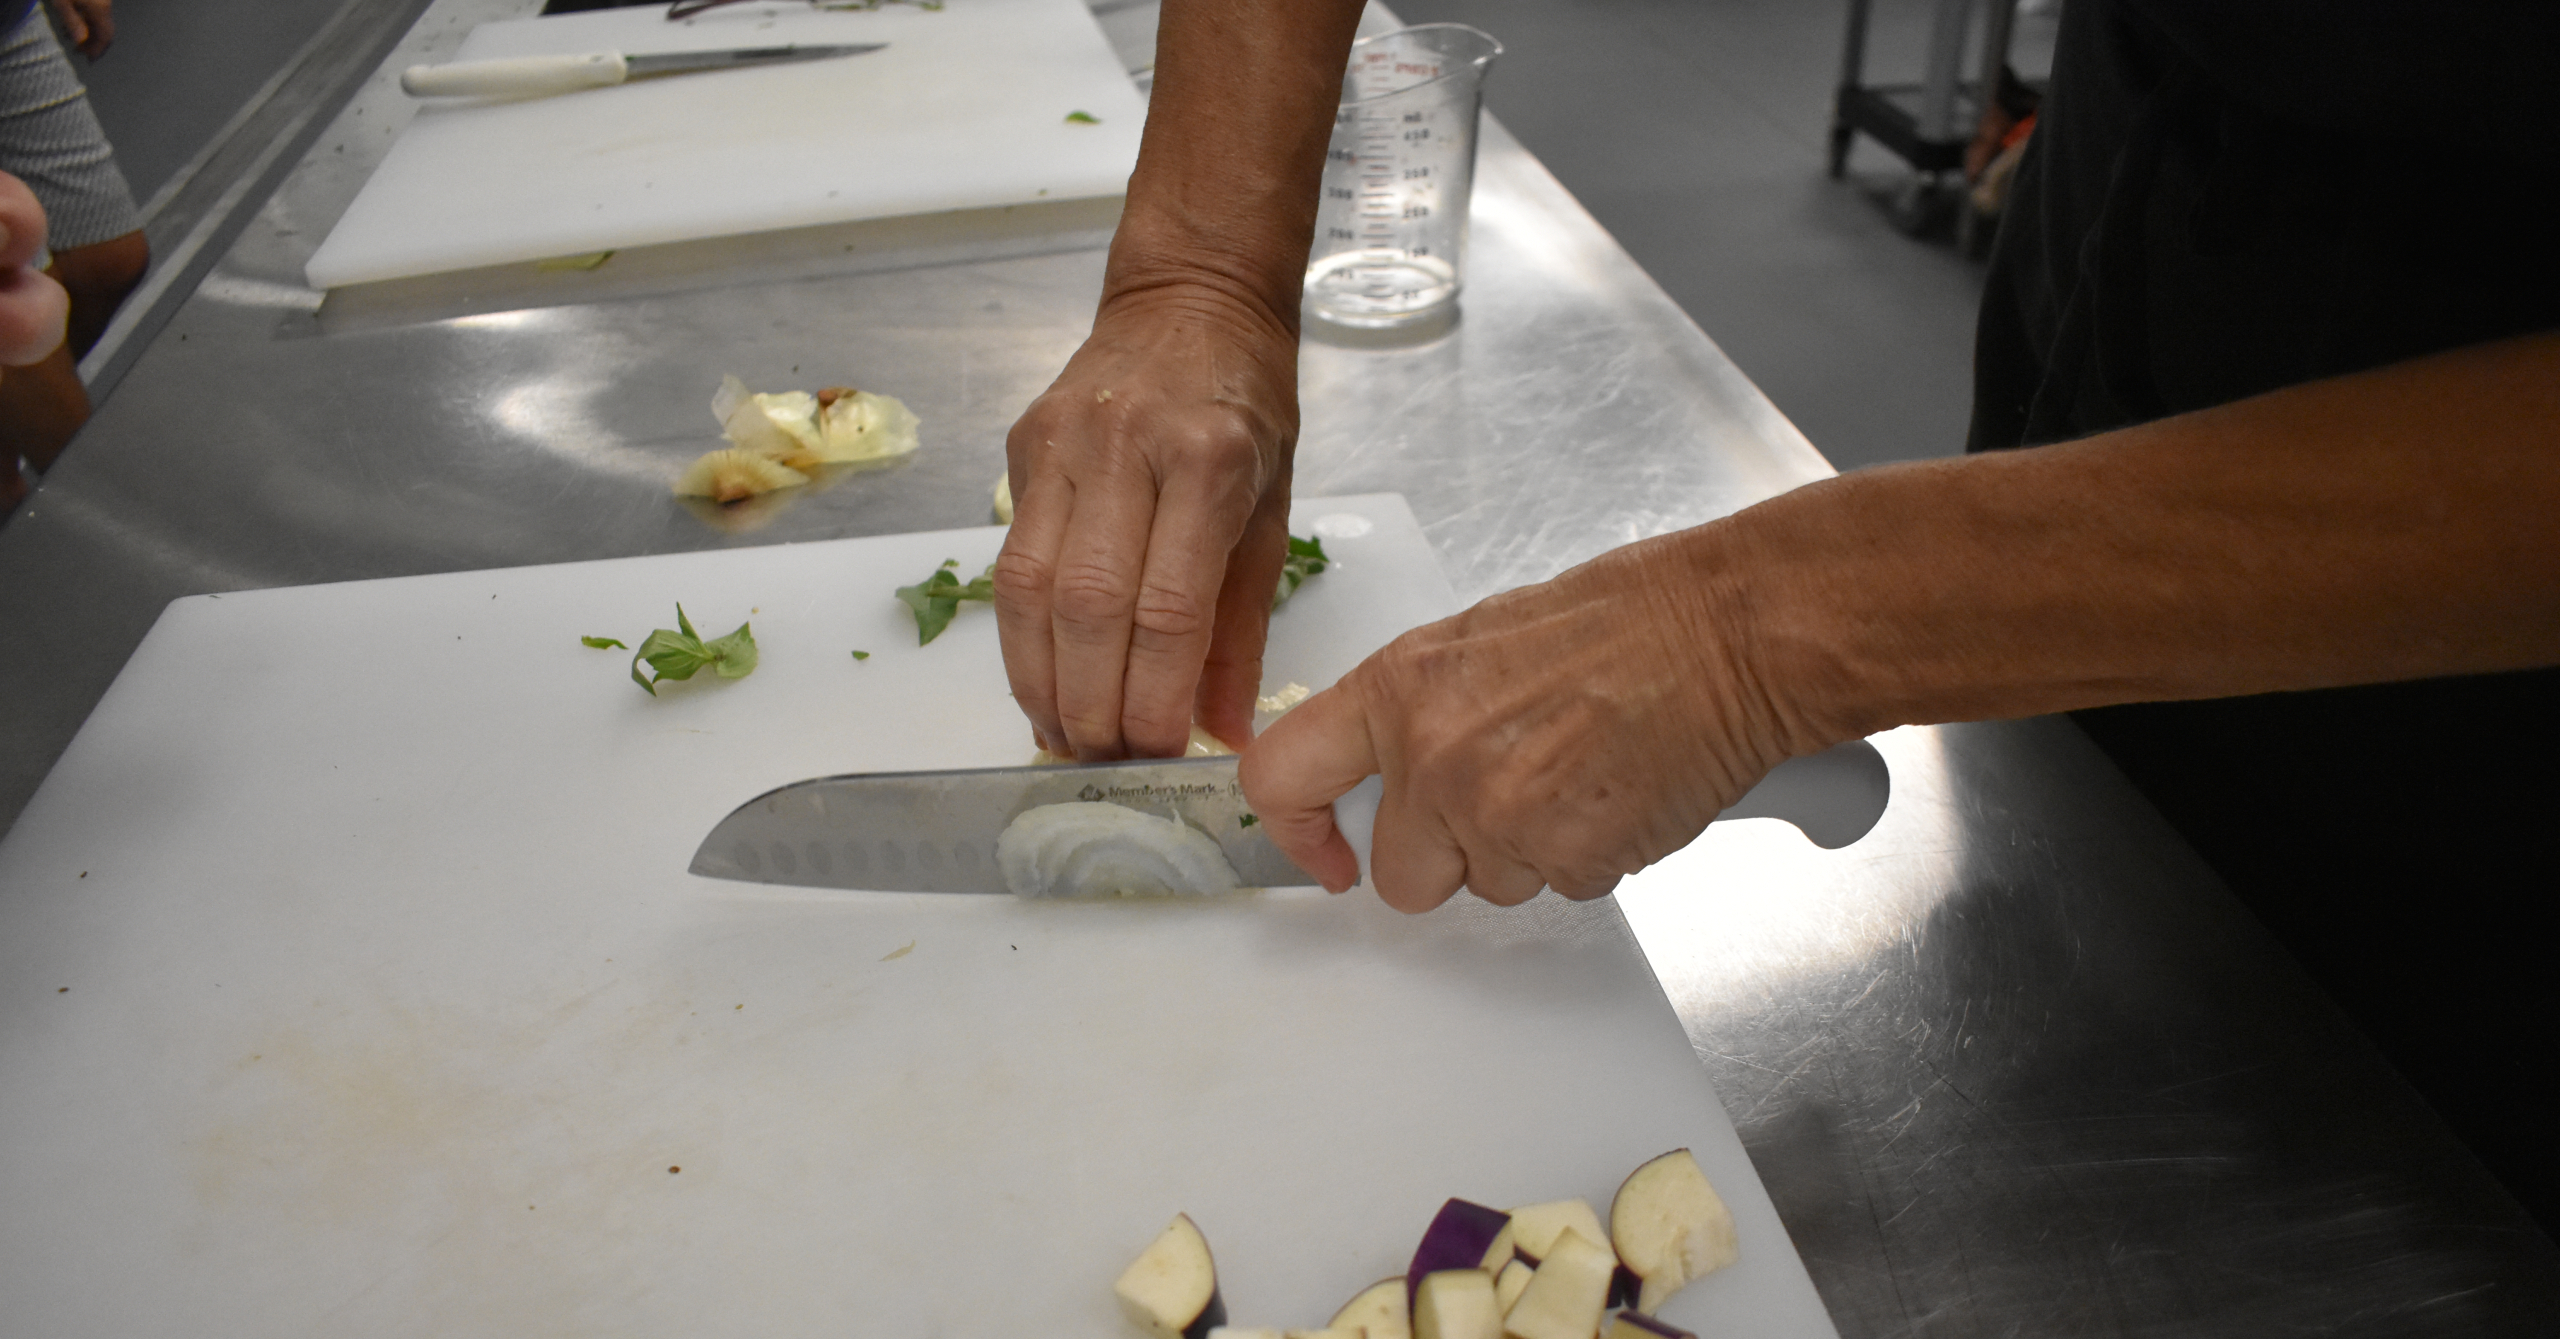 Knife Skills on an Onion at Feeding South Florida Cooking Classes - Proper Knife Technique